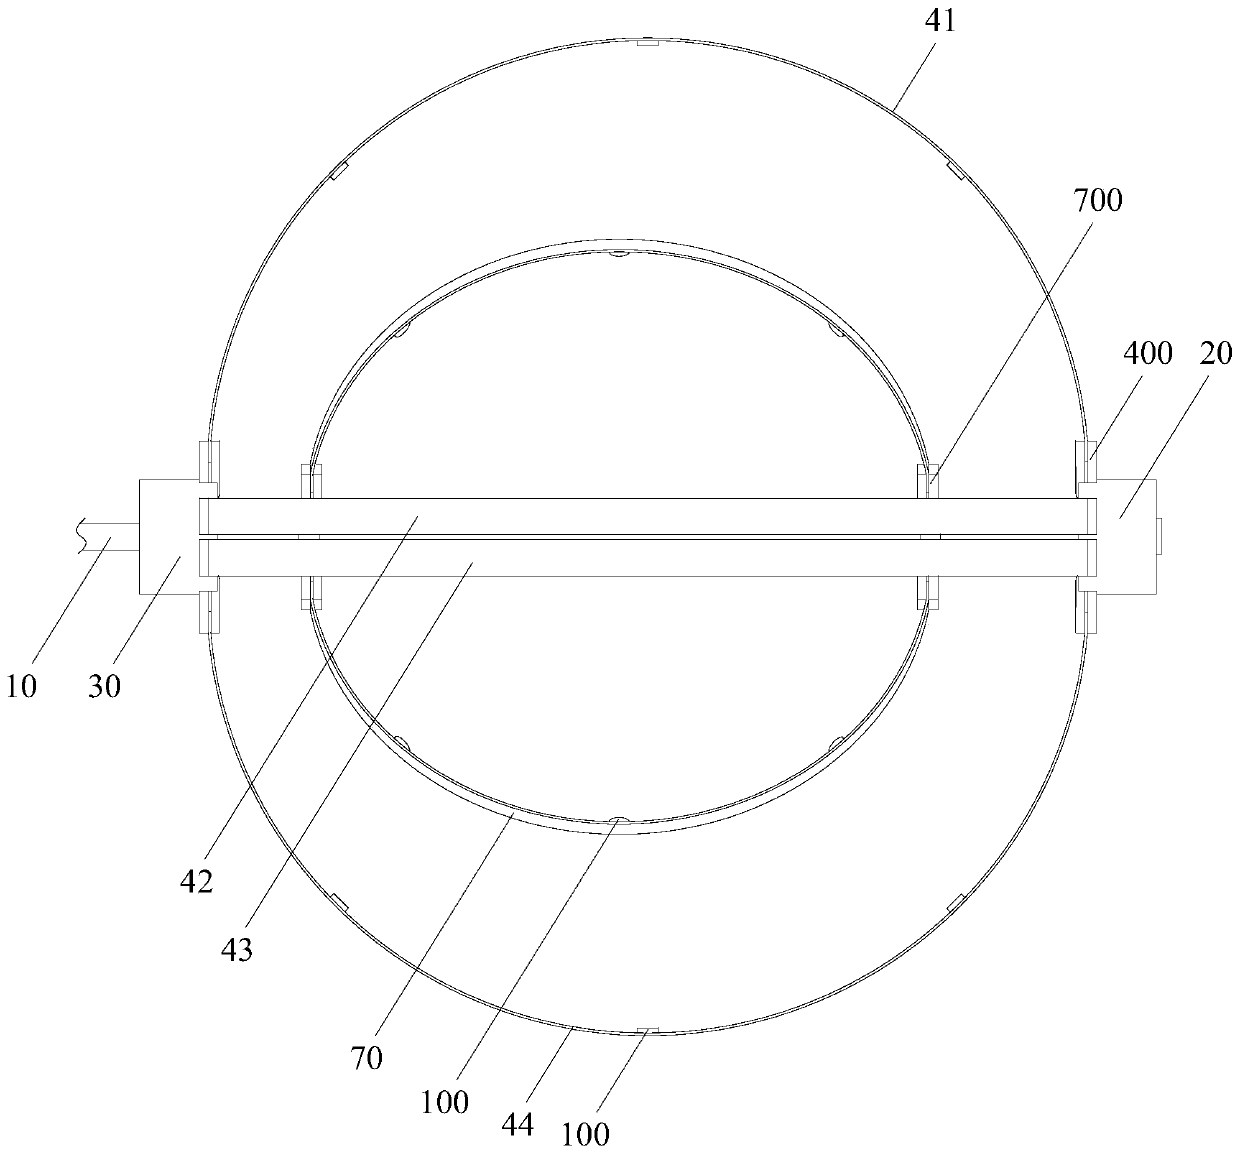 Auxiliary device for natural orifice transluminal endoscopic surgery